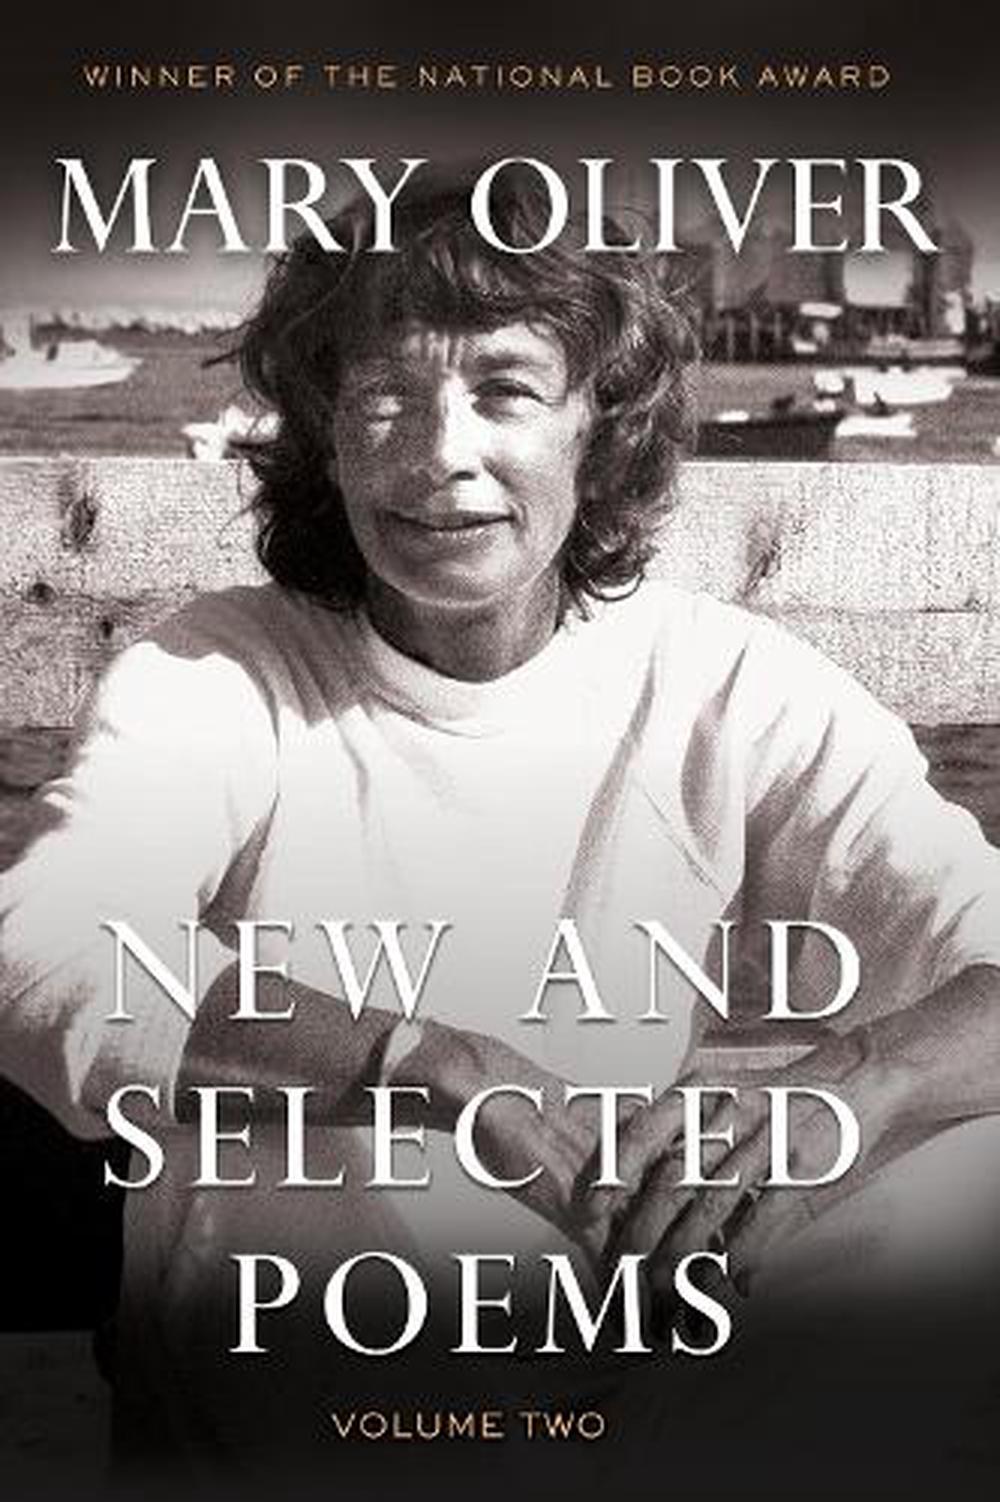 mary oliver new and selected poems volume 1